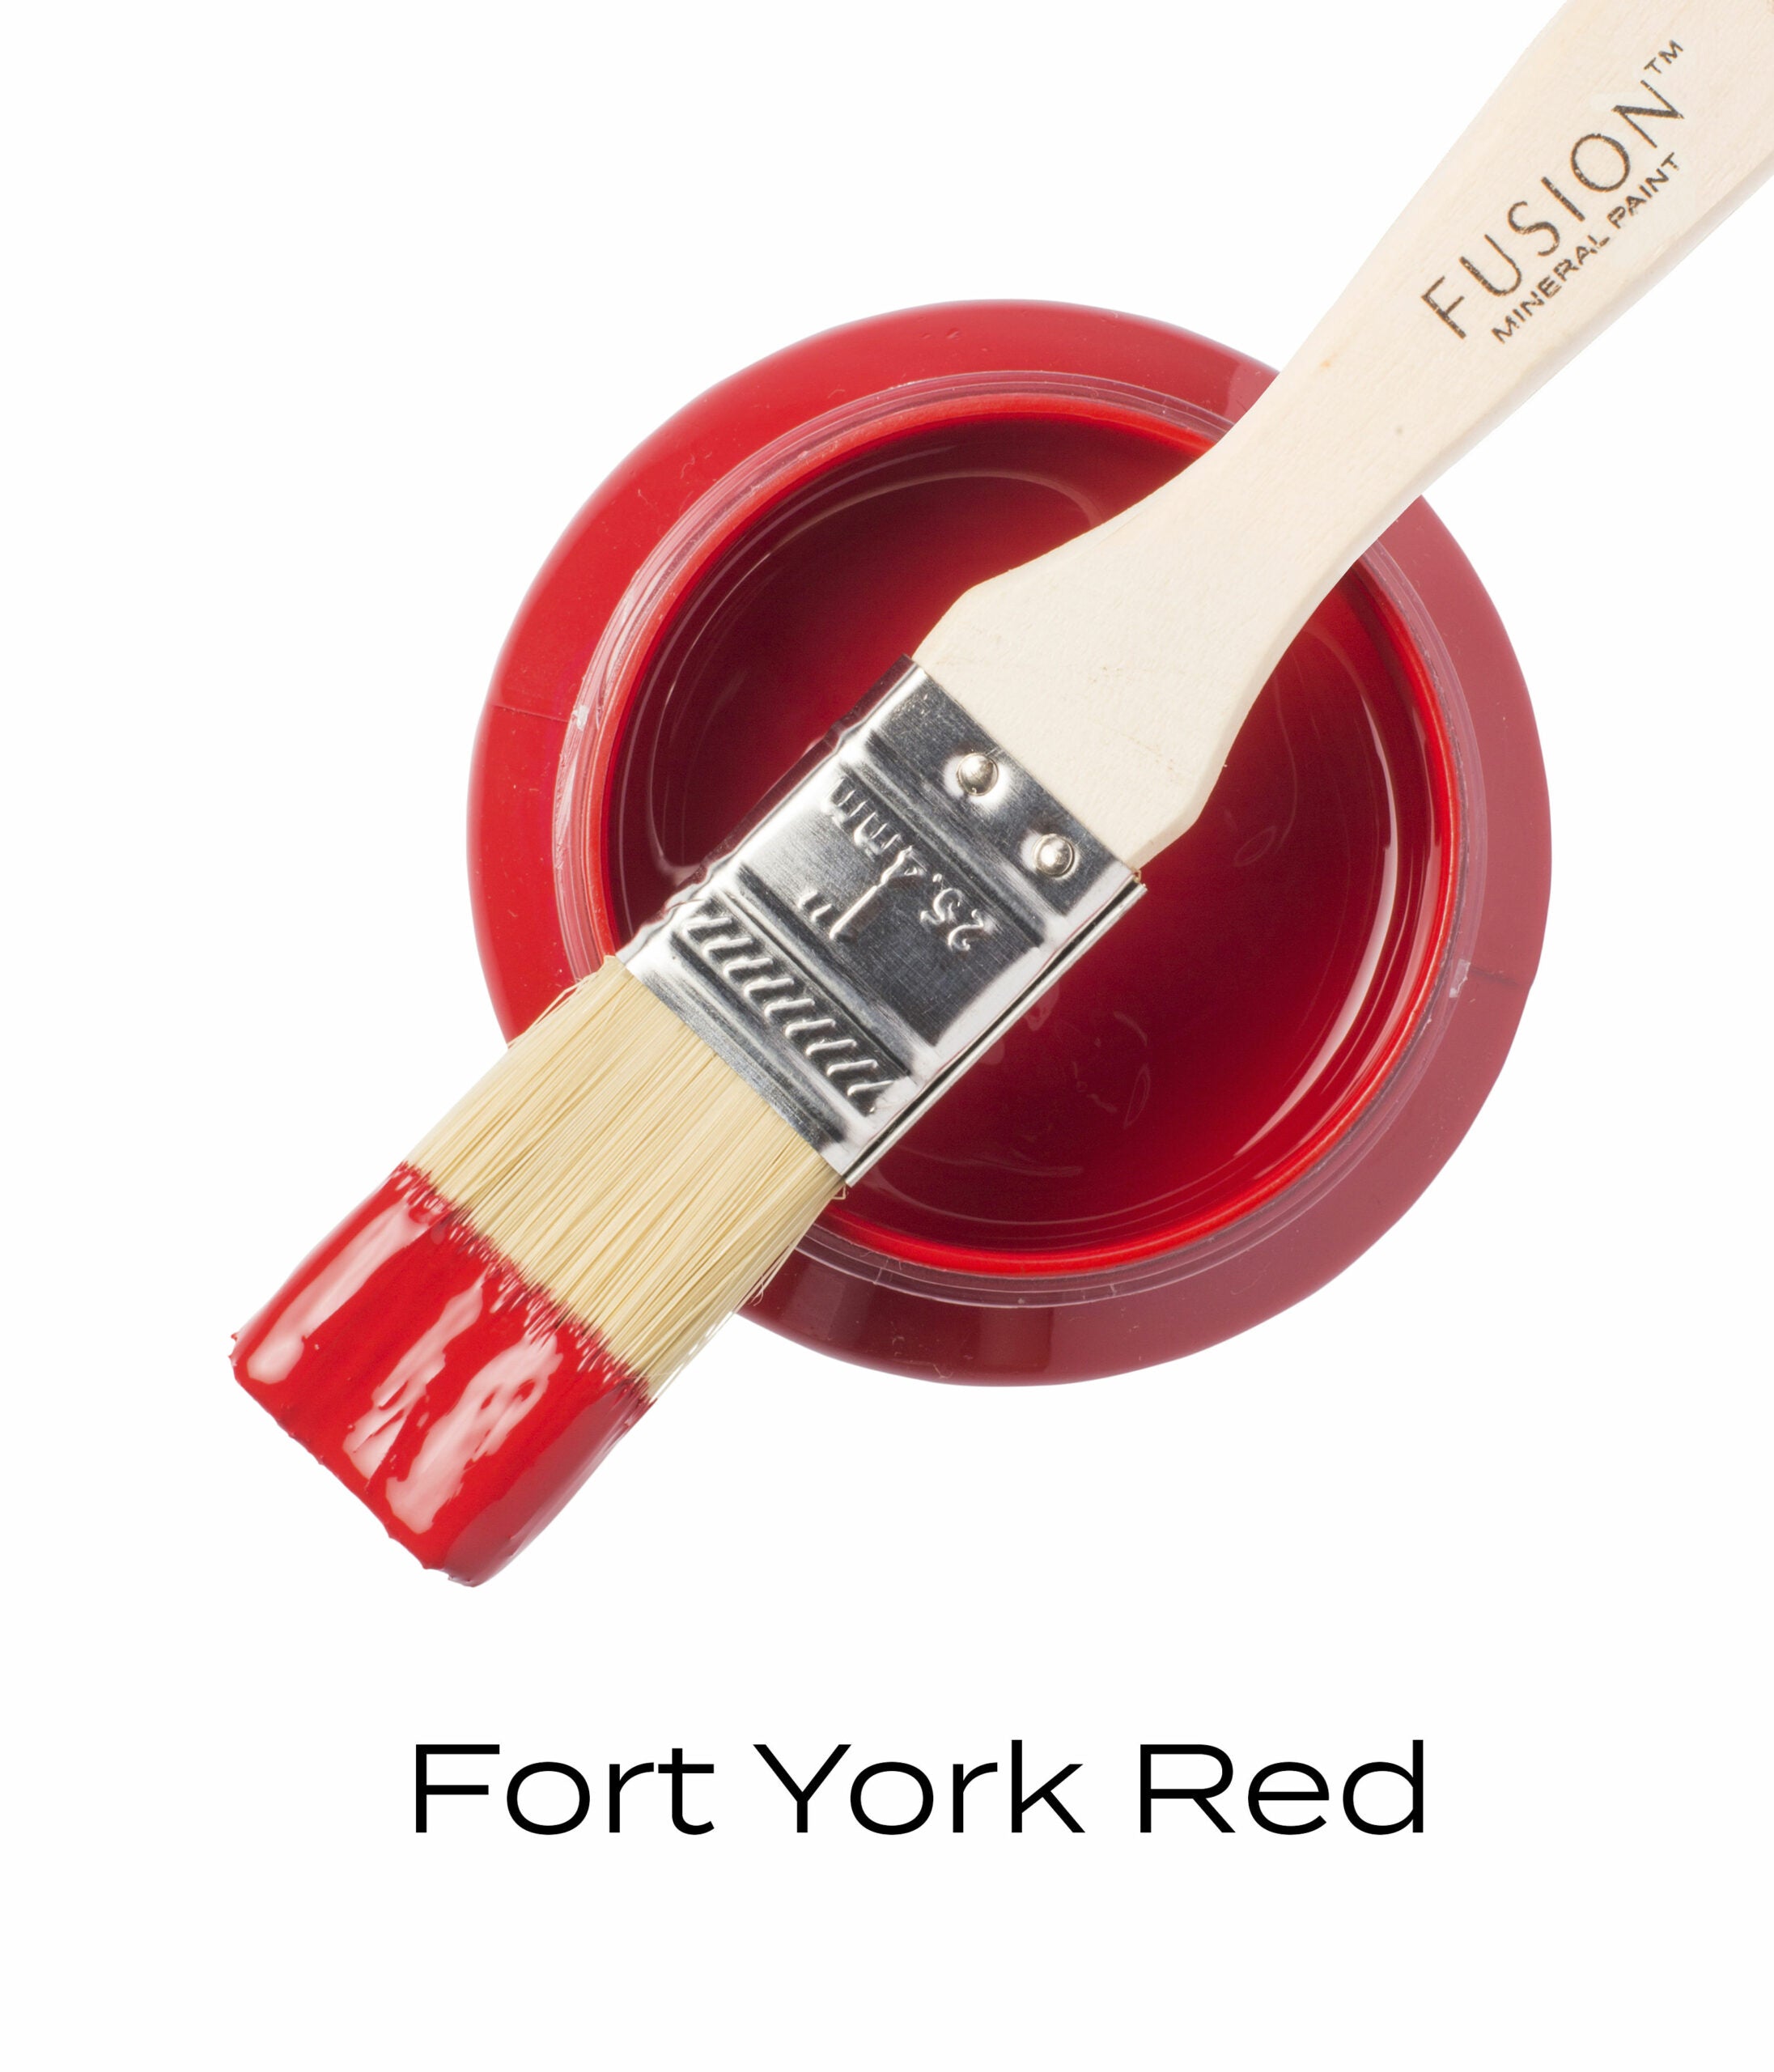 Fusion Mineral Paint Fort York Red pint brush